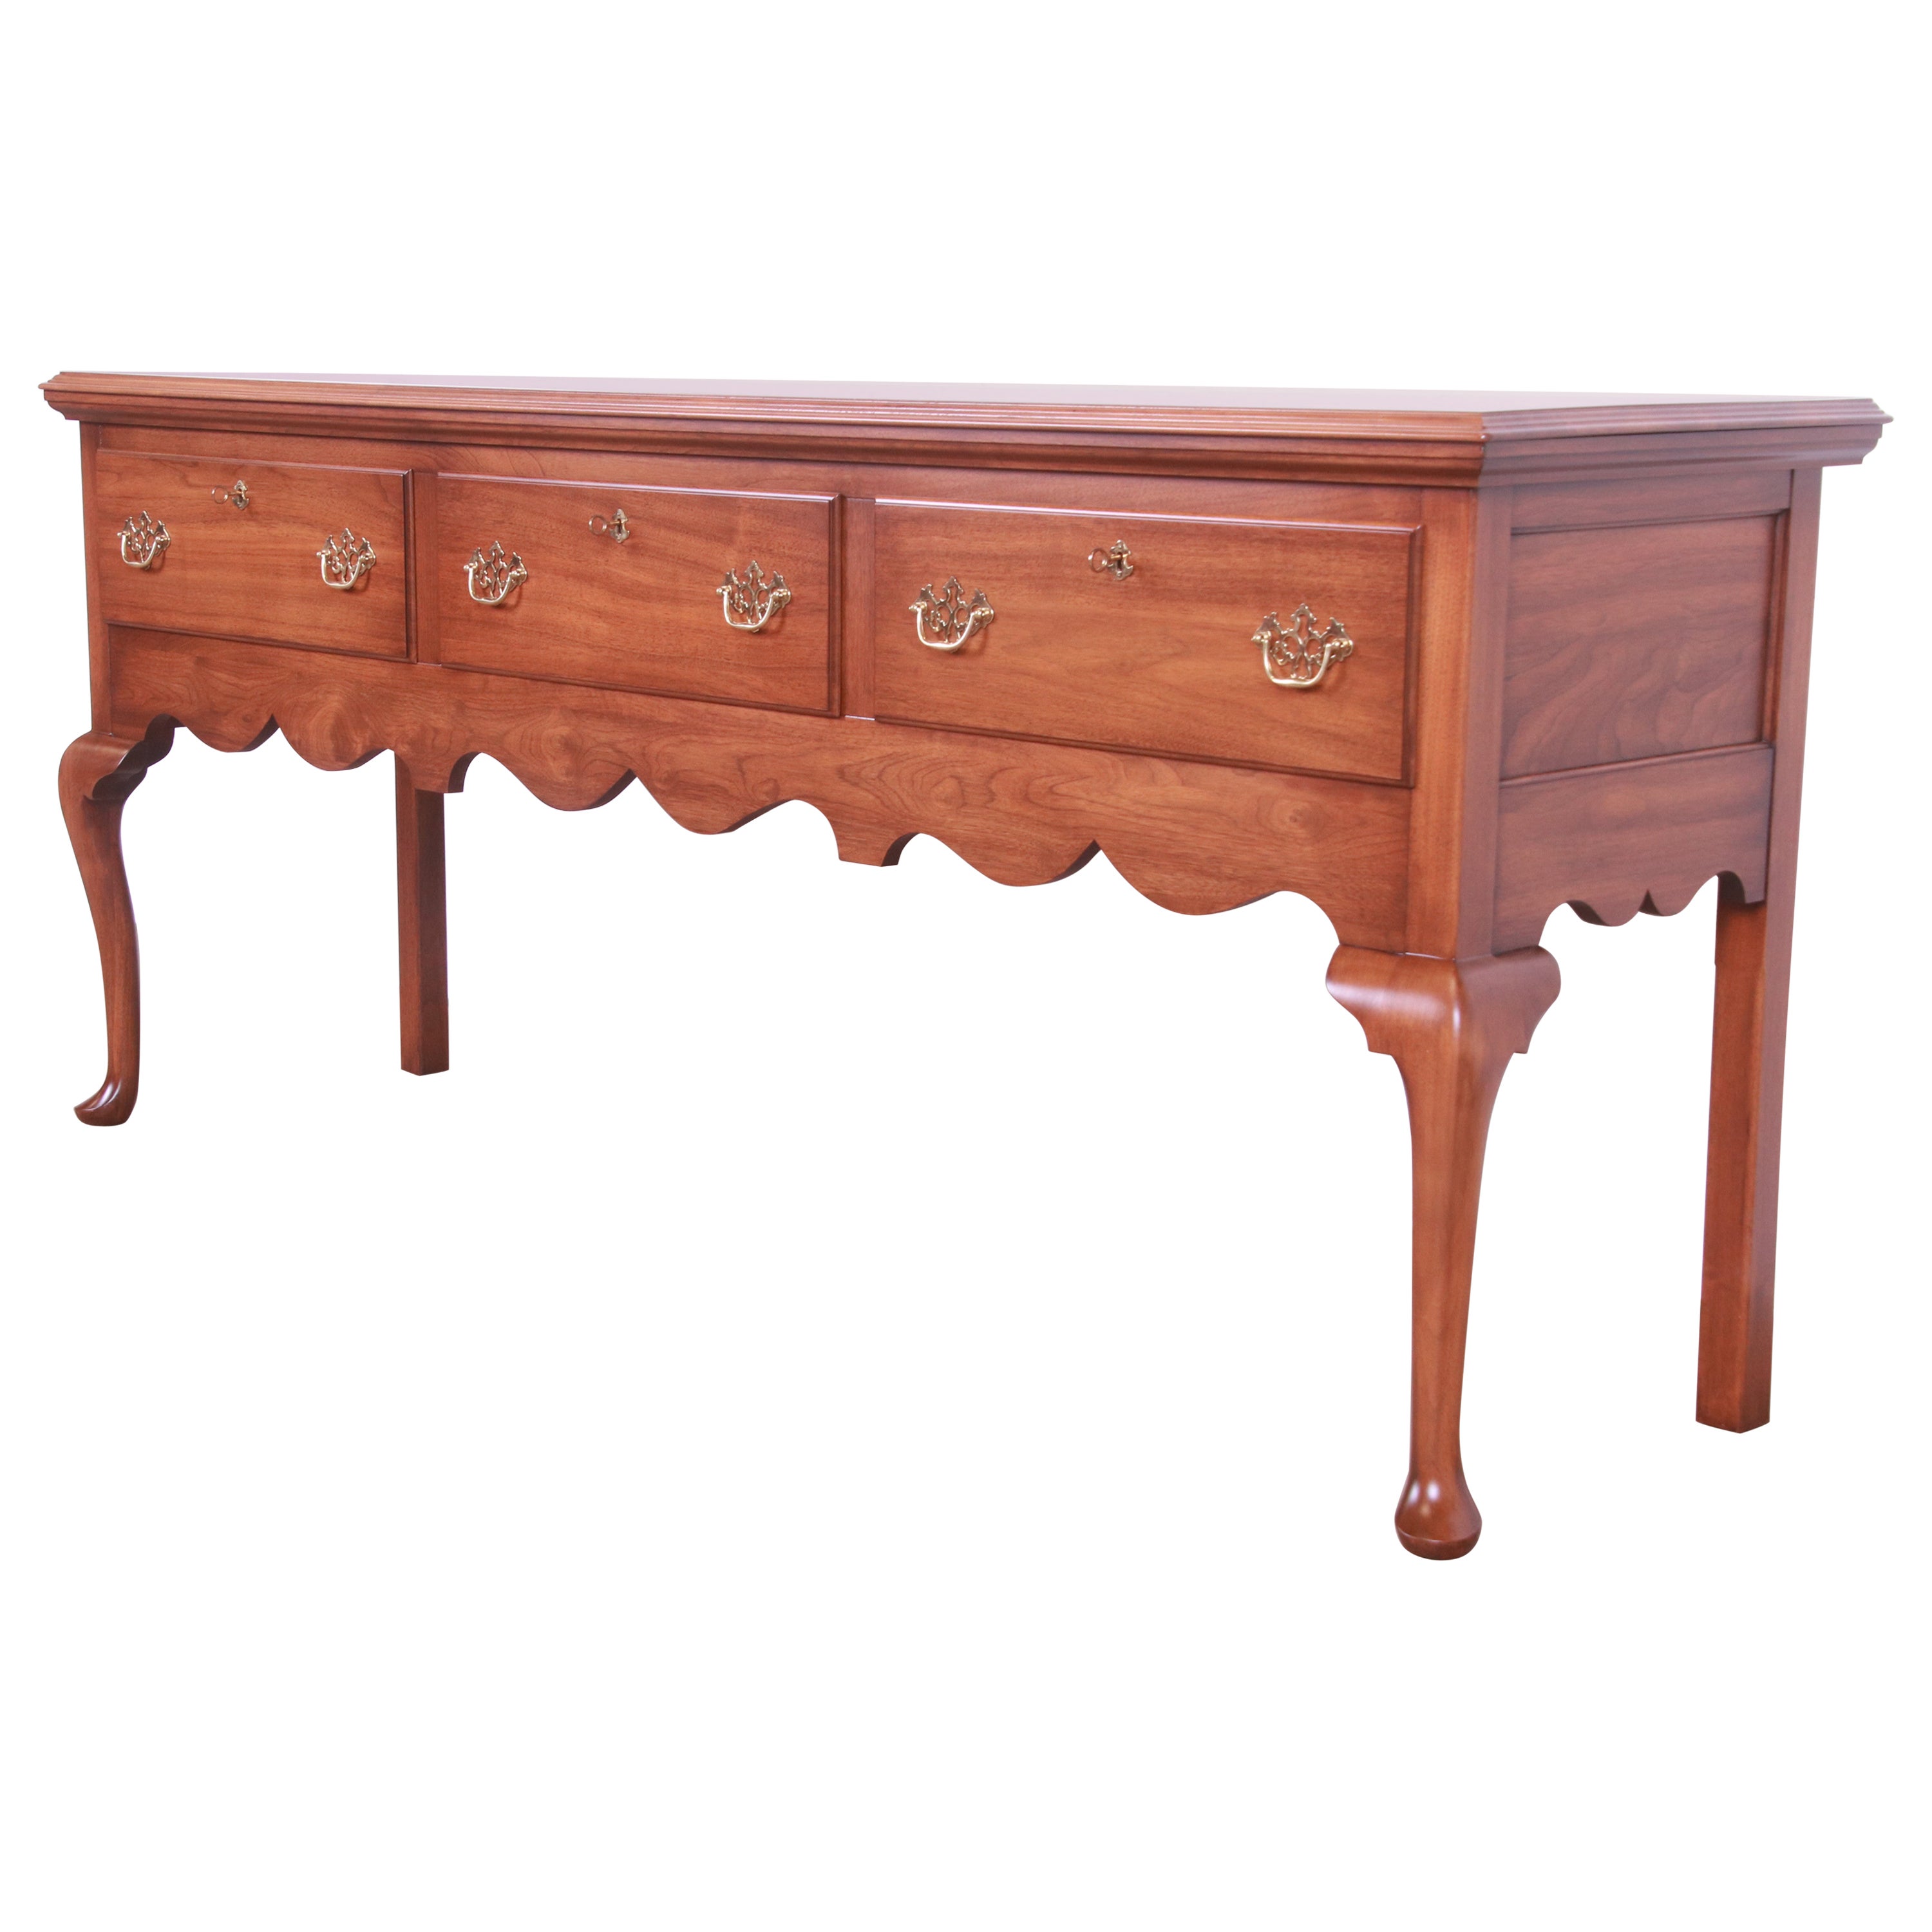 Henkel Harris Queen Anne Solid Walnut Sideboard Credenza, Newly Refinished For Sale